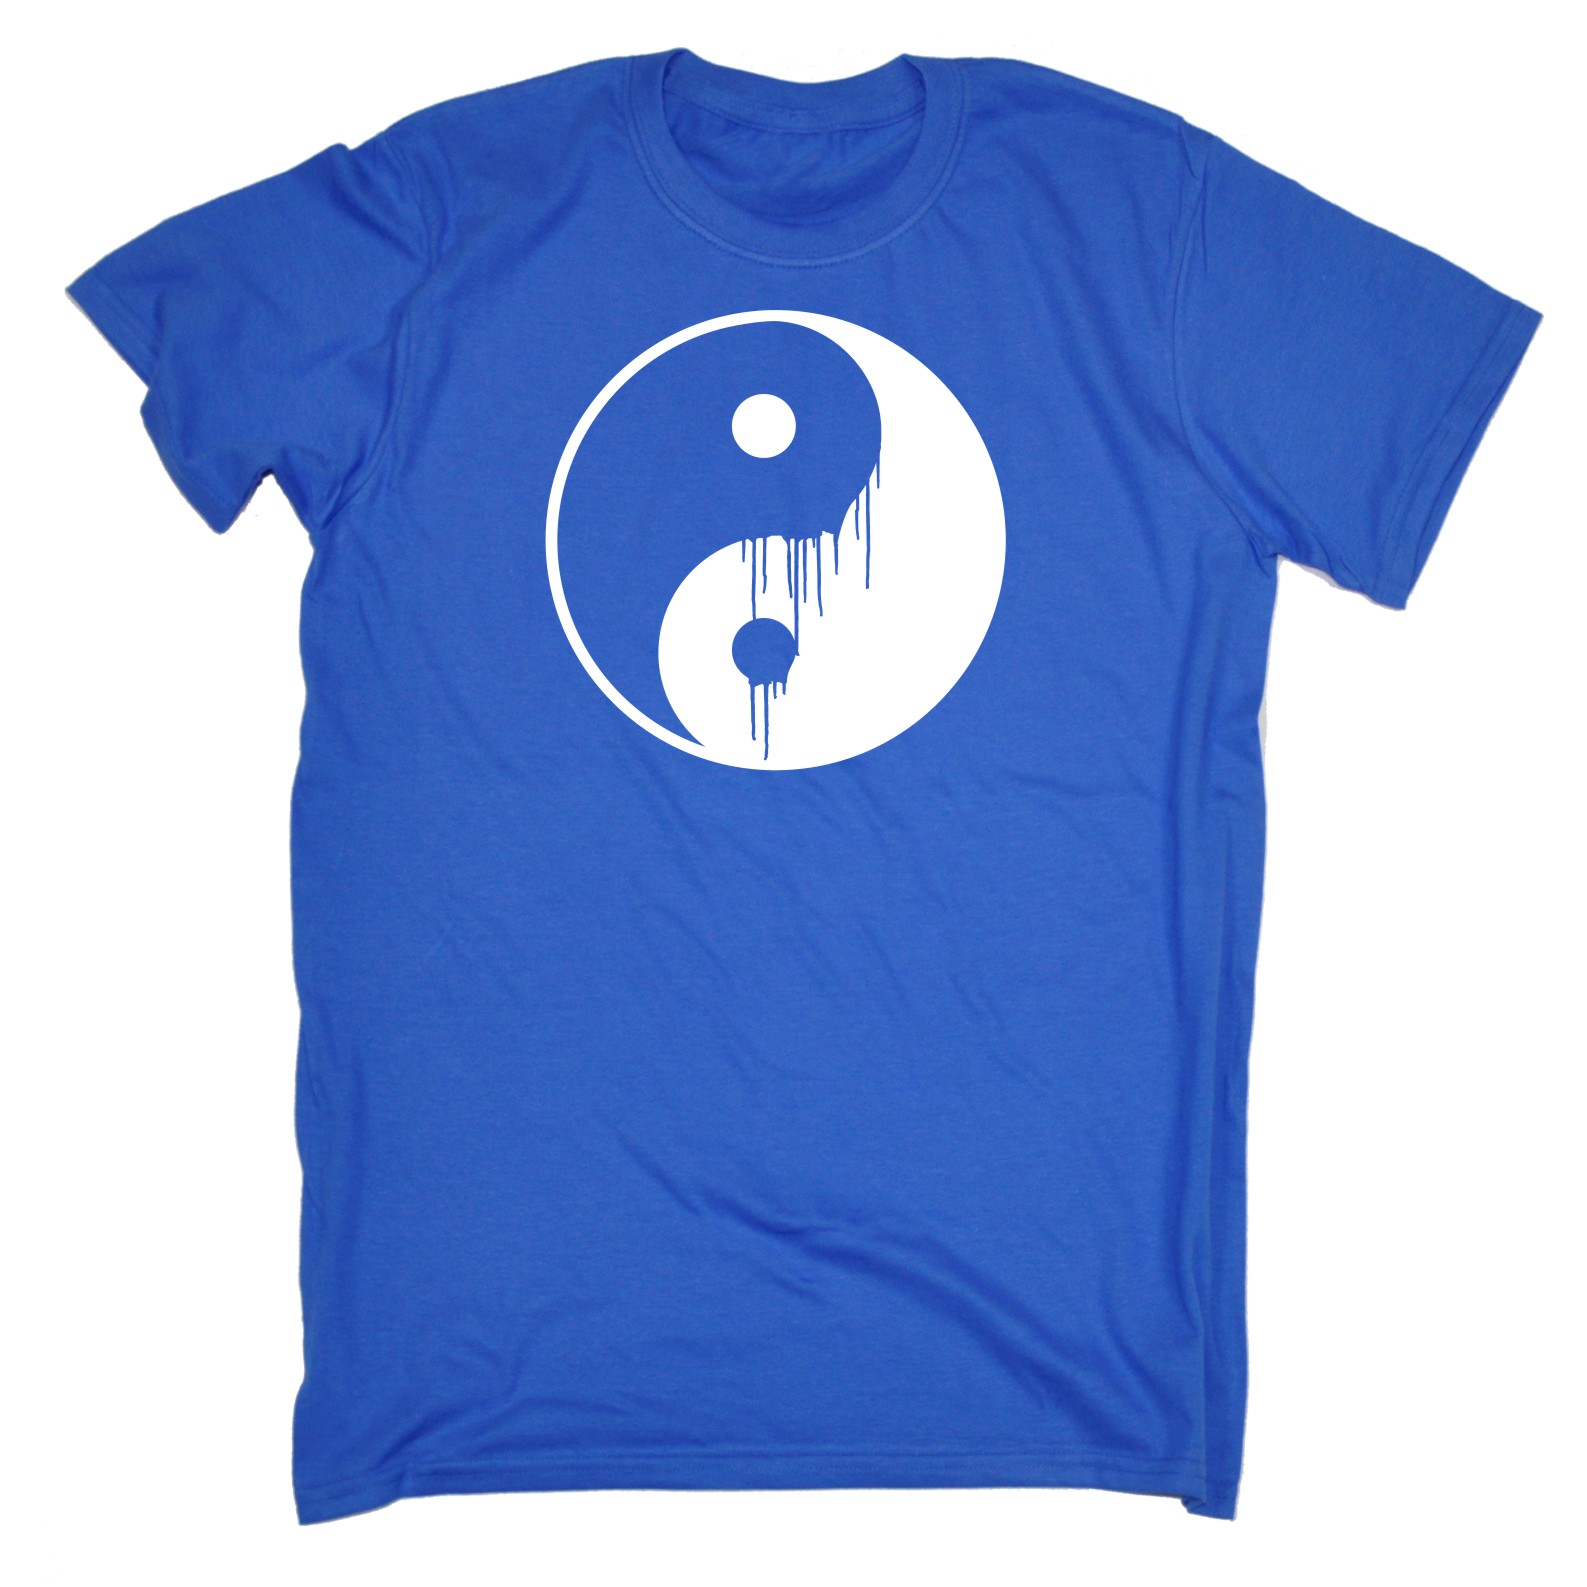 Ying Yang Dripping Cool Chinese Cultural T-SHIRT Birthday gift present ...